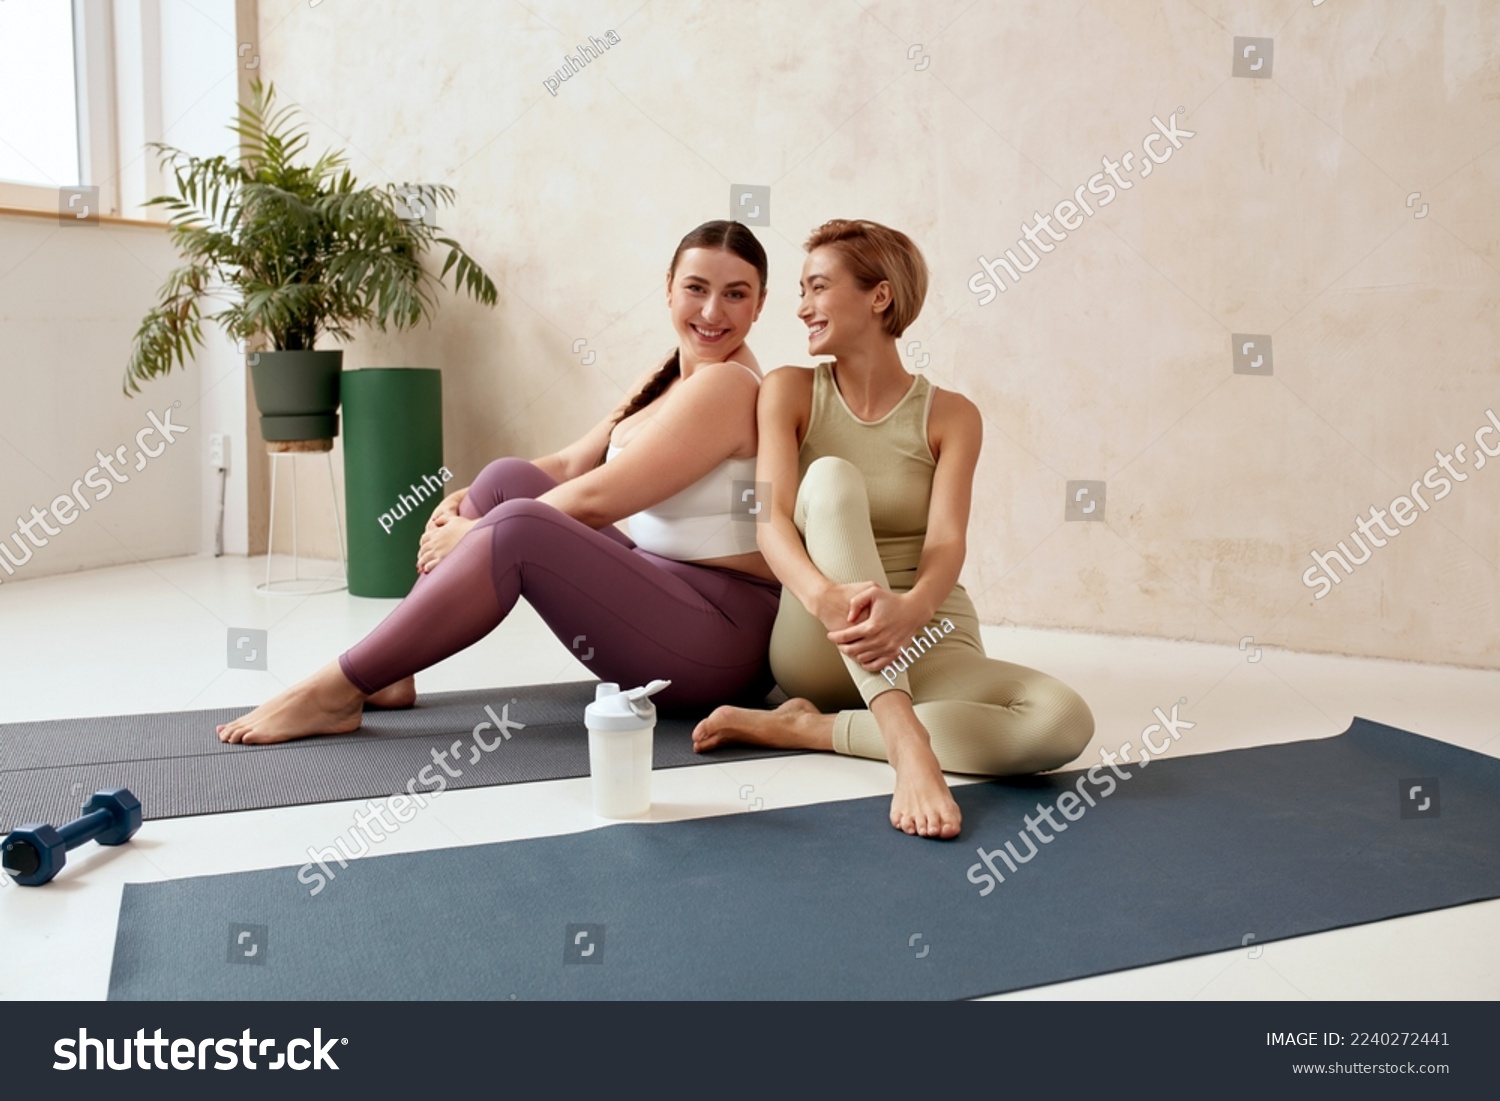 Smiling Woman Embracing After Yoga. Female Friends Posing After Training Together At Home. Attractive Trainer And Her Client In Sportswear Sitting On Mat #2240272441